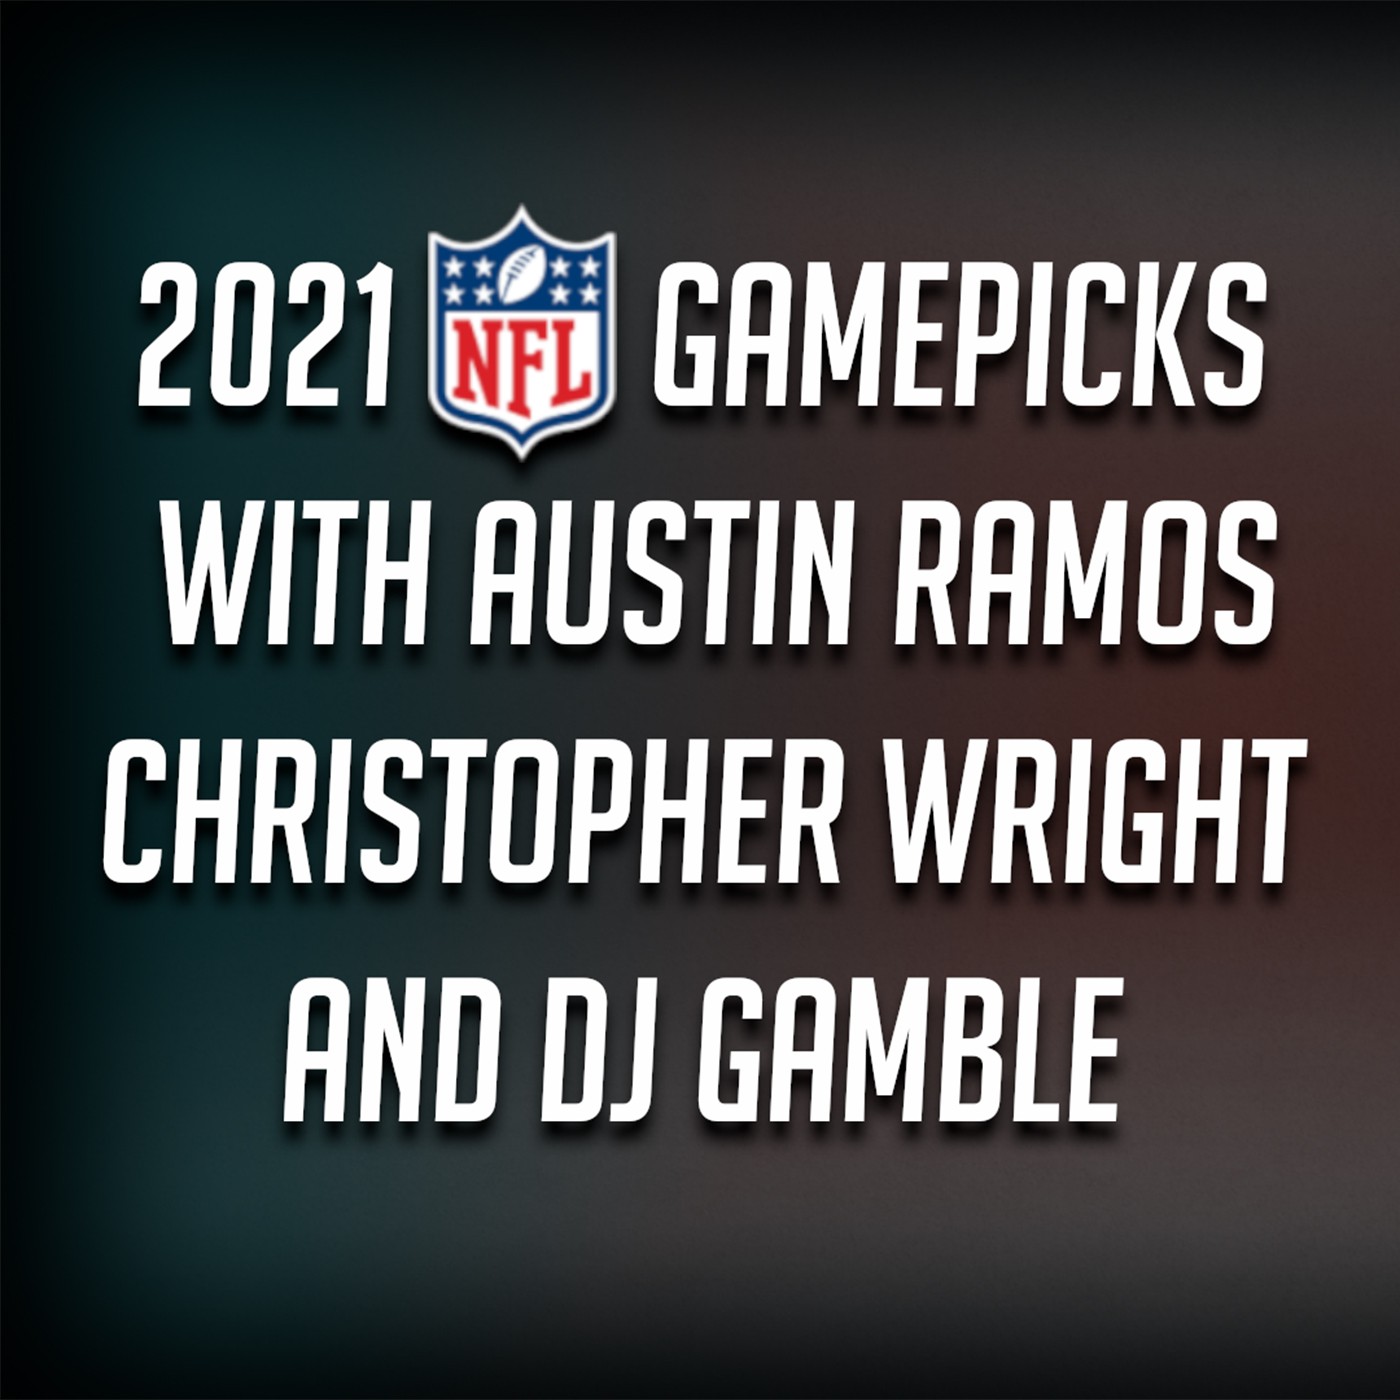 NFL Gamepicks with Austin Ramos, Christopher Wright, and Joey Gross